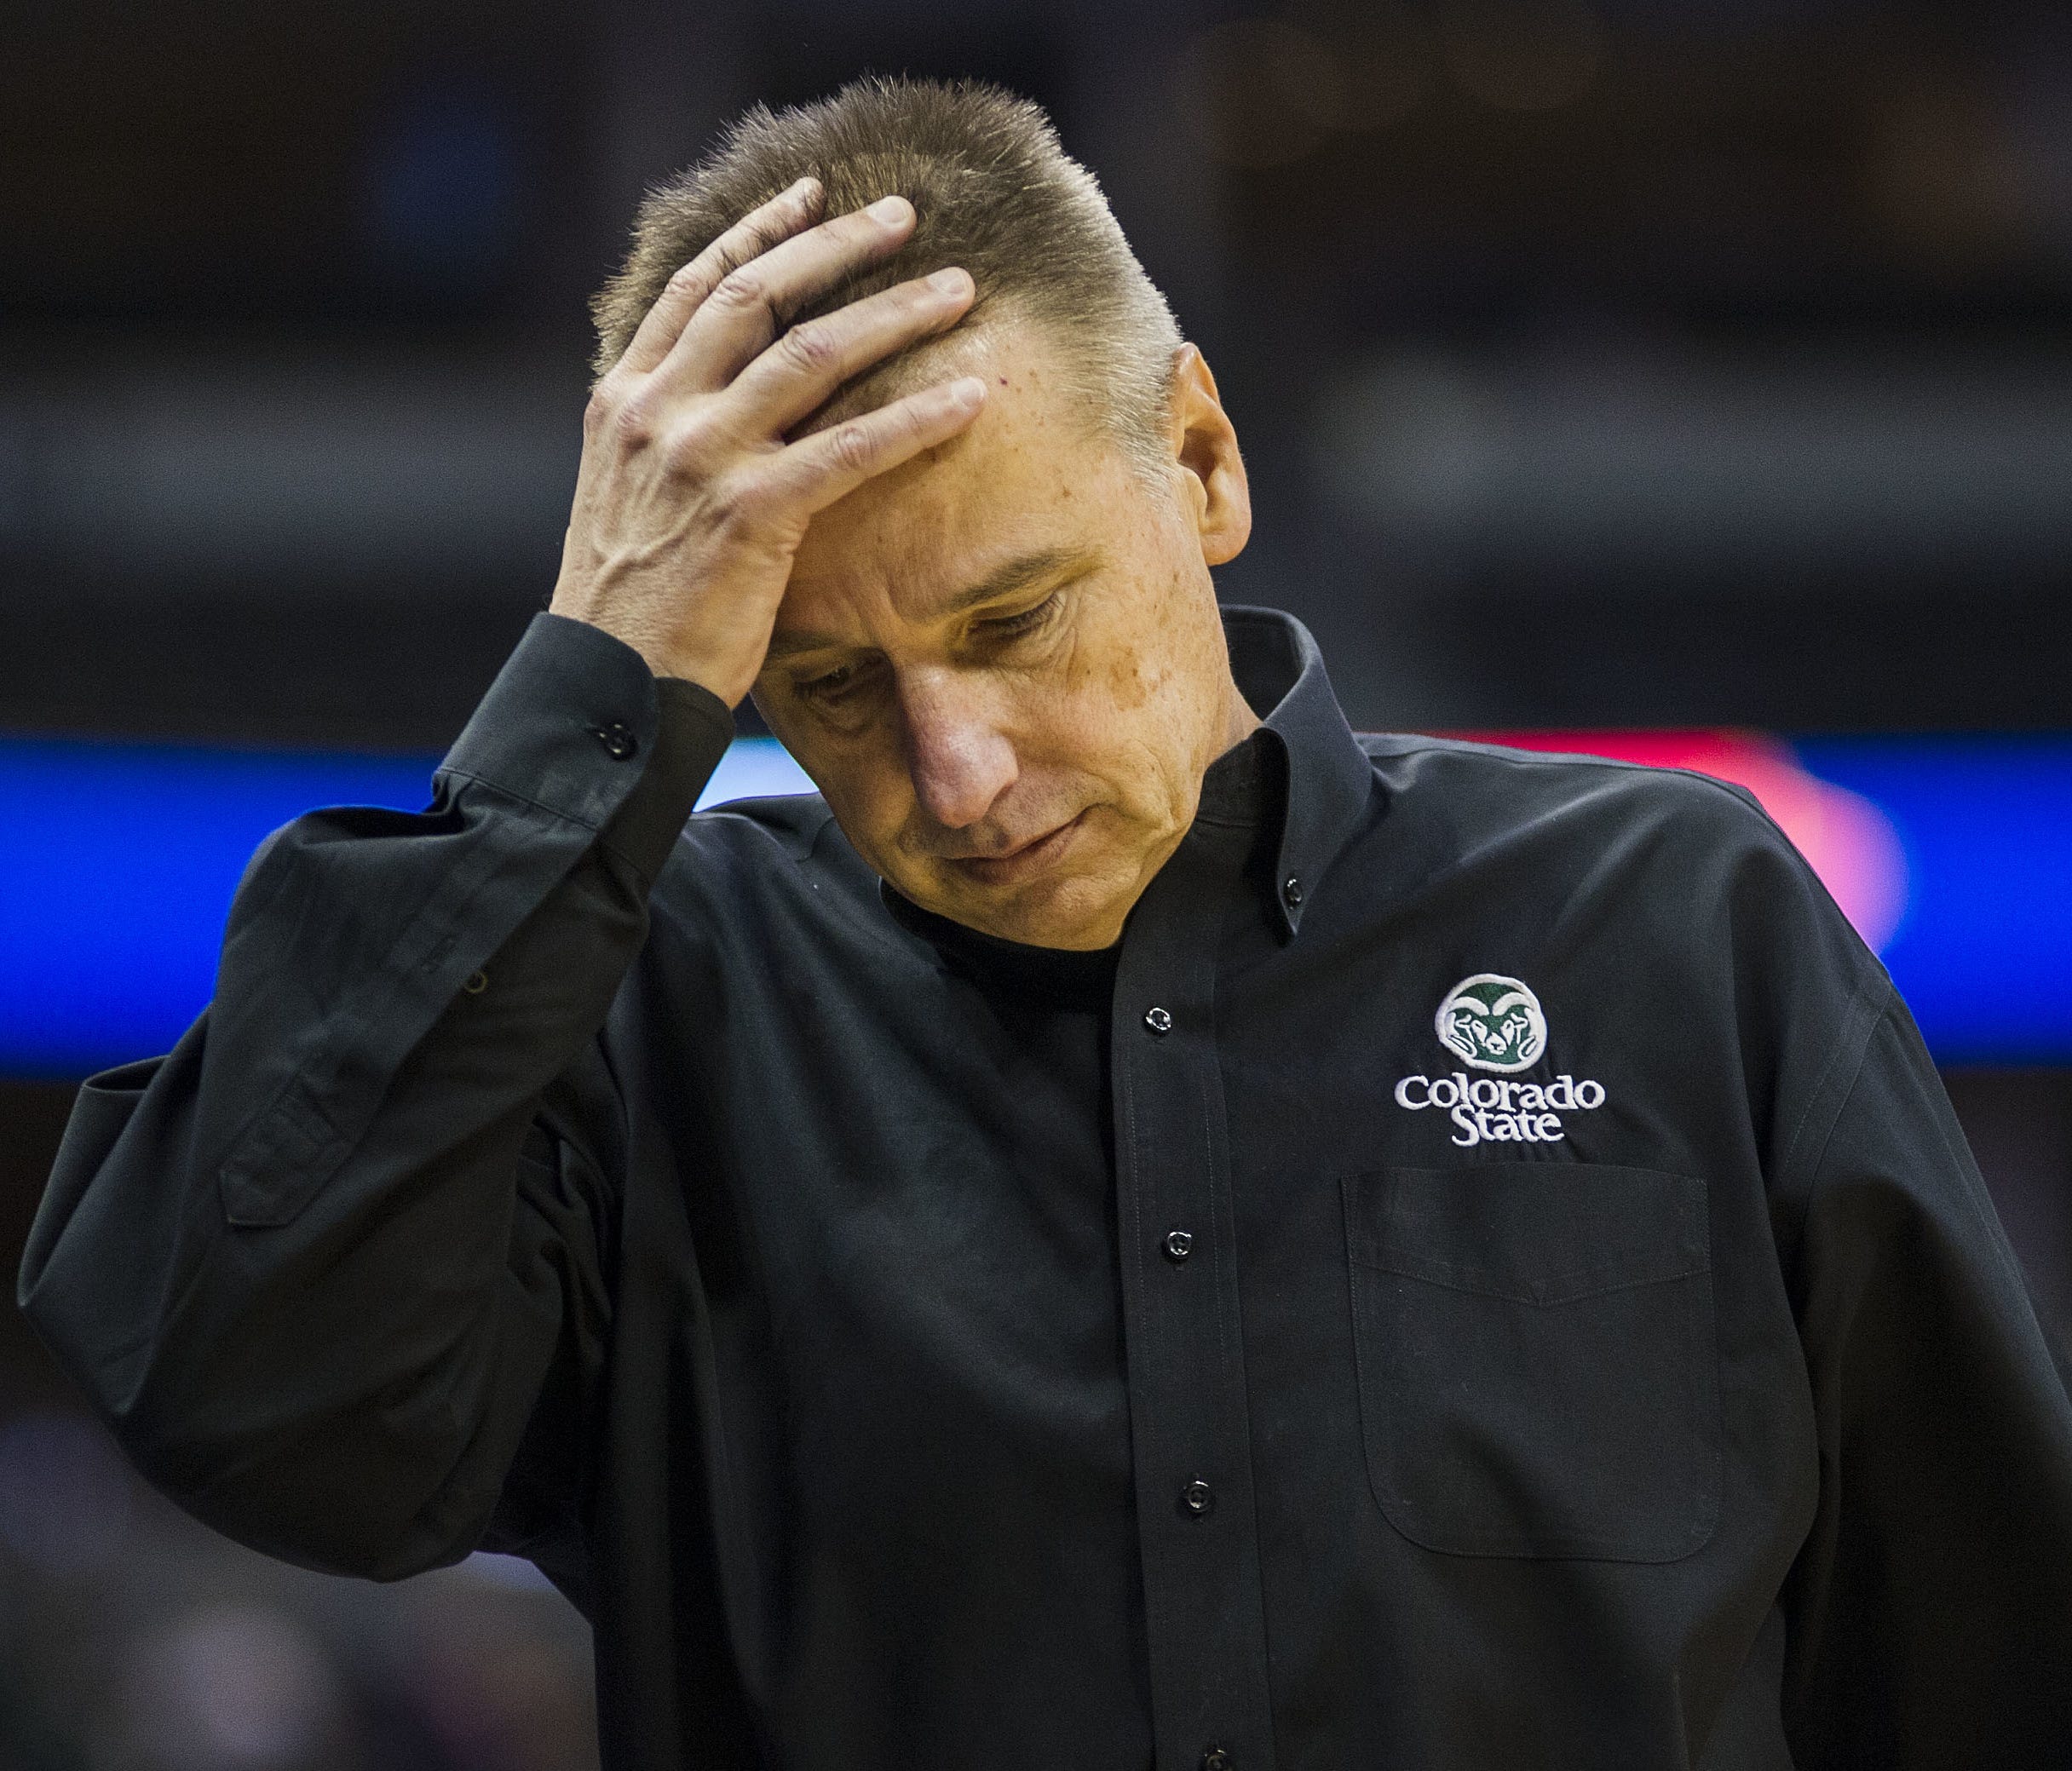 A 2013-14 internal CSU investigation discovered men's basketball coach Larry Eustachy created a culture of fear and intimidation within his program and emotionally abused players.